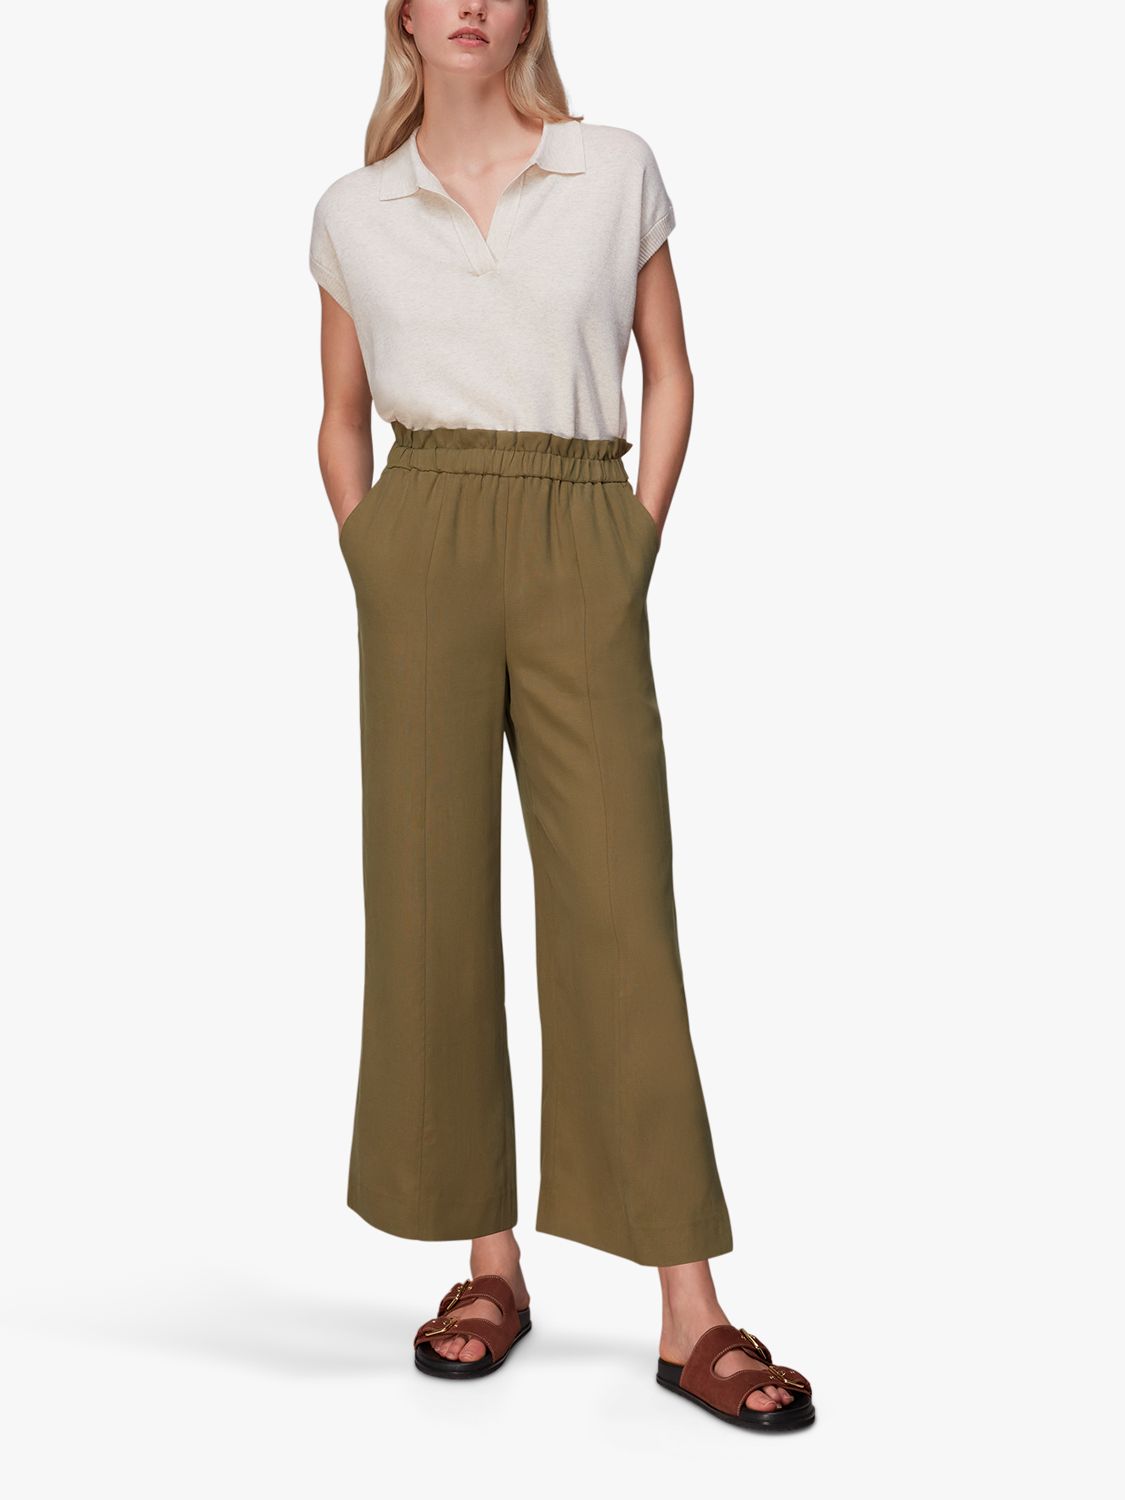 Whistles Grace Elasticated Waist Trousers, Olive at John Lewis & Partners